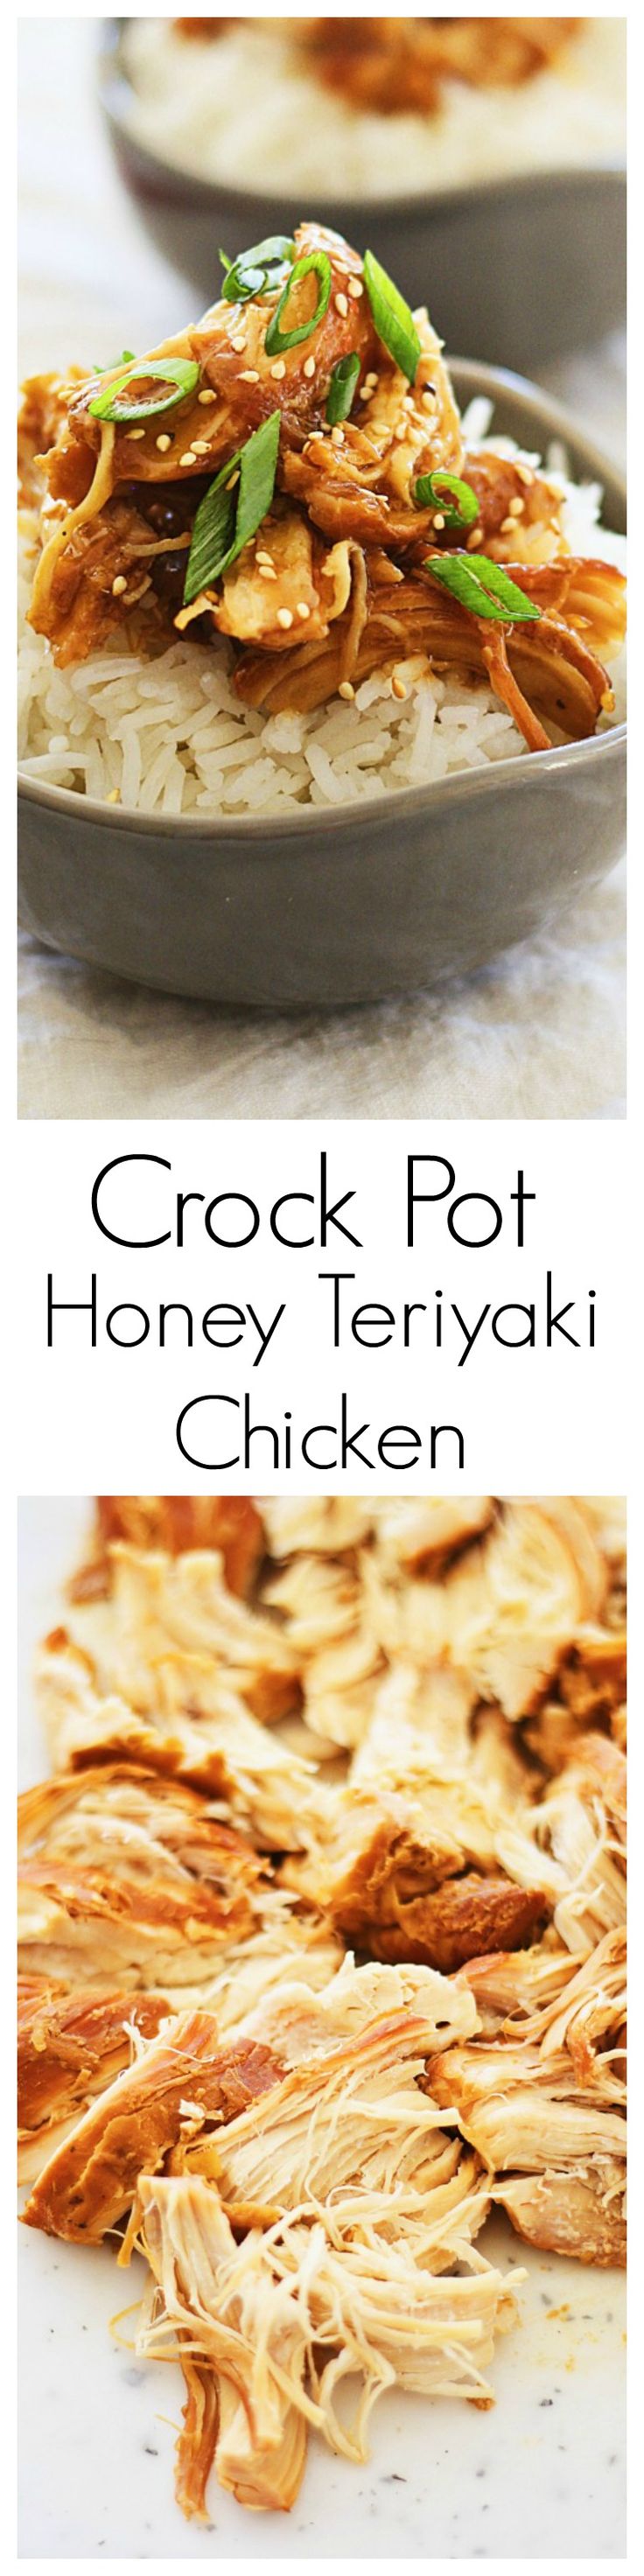 Slow Cooker Honey Teriyaki Chicken – tender chicken with sweet, savory, and delicious honey teriyaki sauce. Made in crock pot and takes only 10 mins to prep | rasamalaysia.com